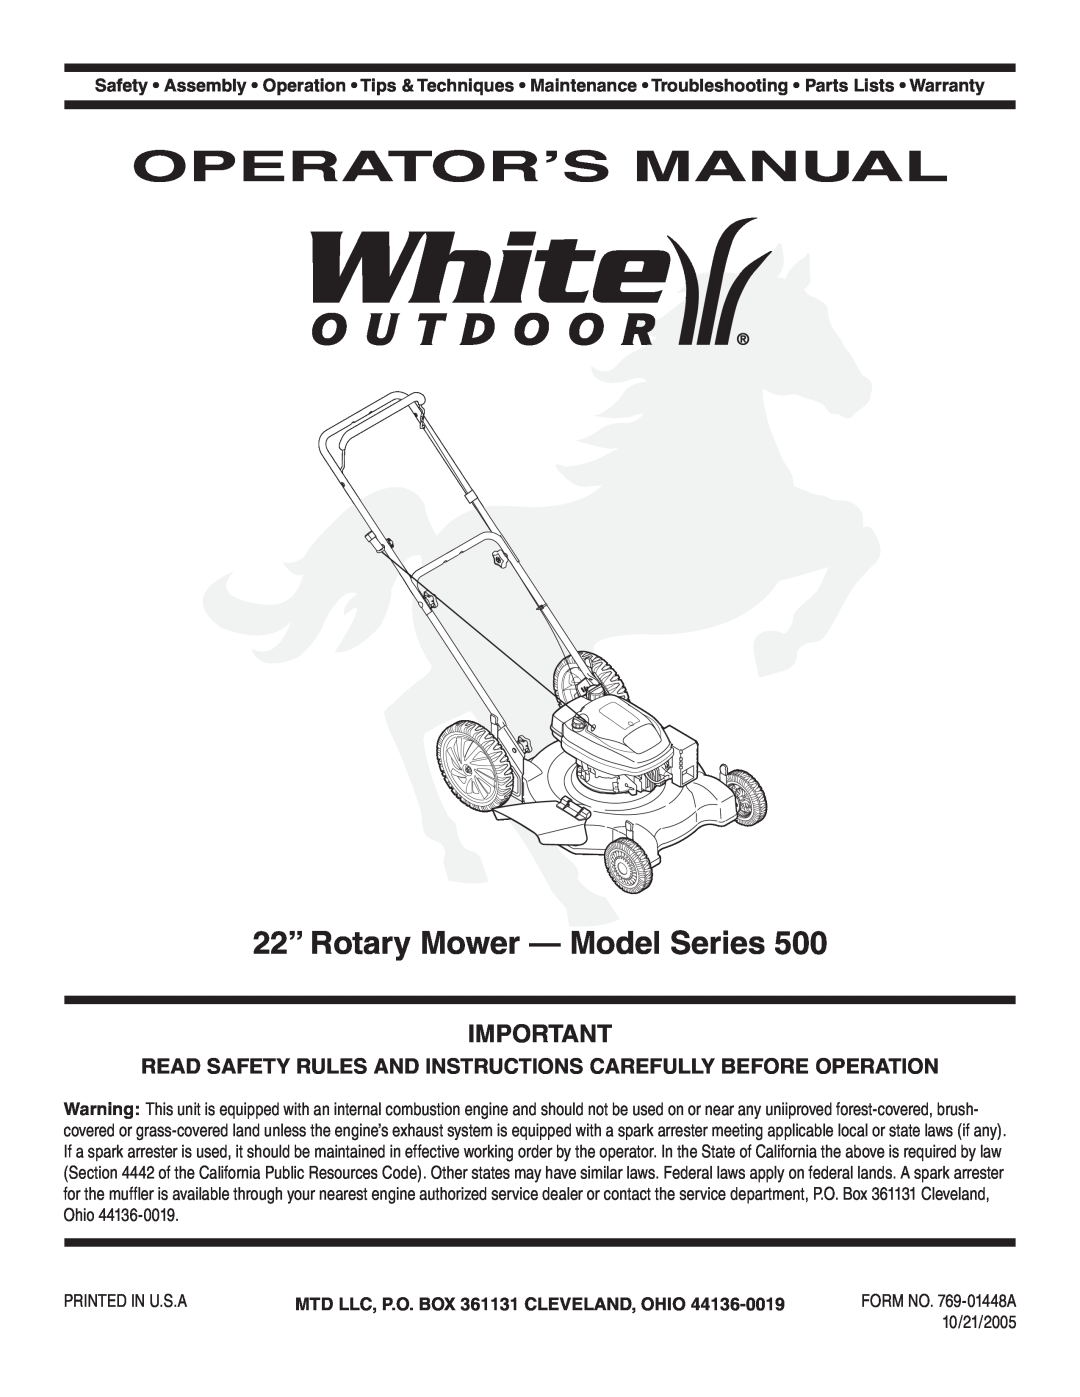 White Outdoor 500 manual Operator’s Manual, series Snowthrow, IMPORTANT Read safety rules and instructions 